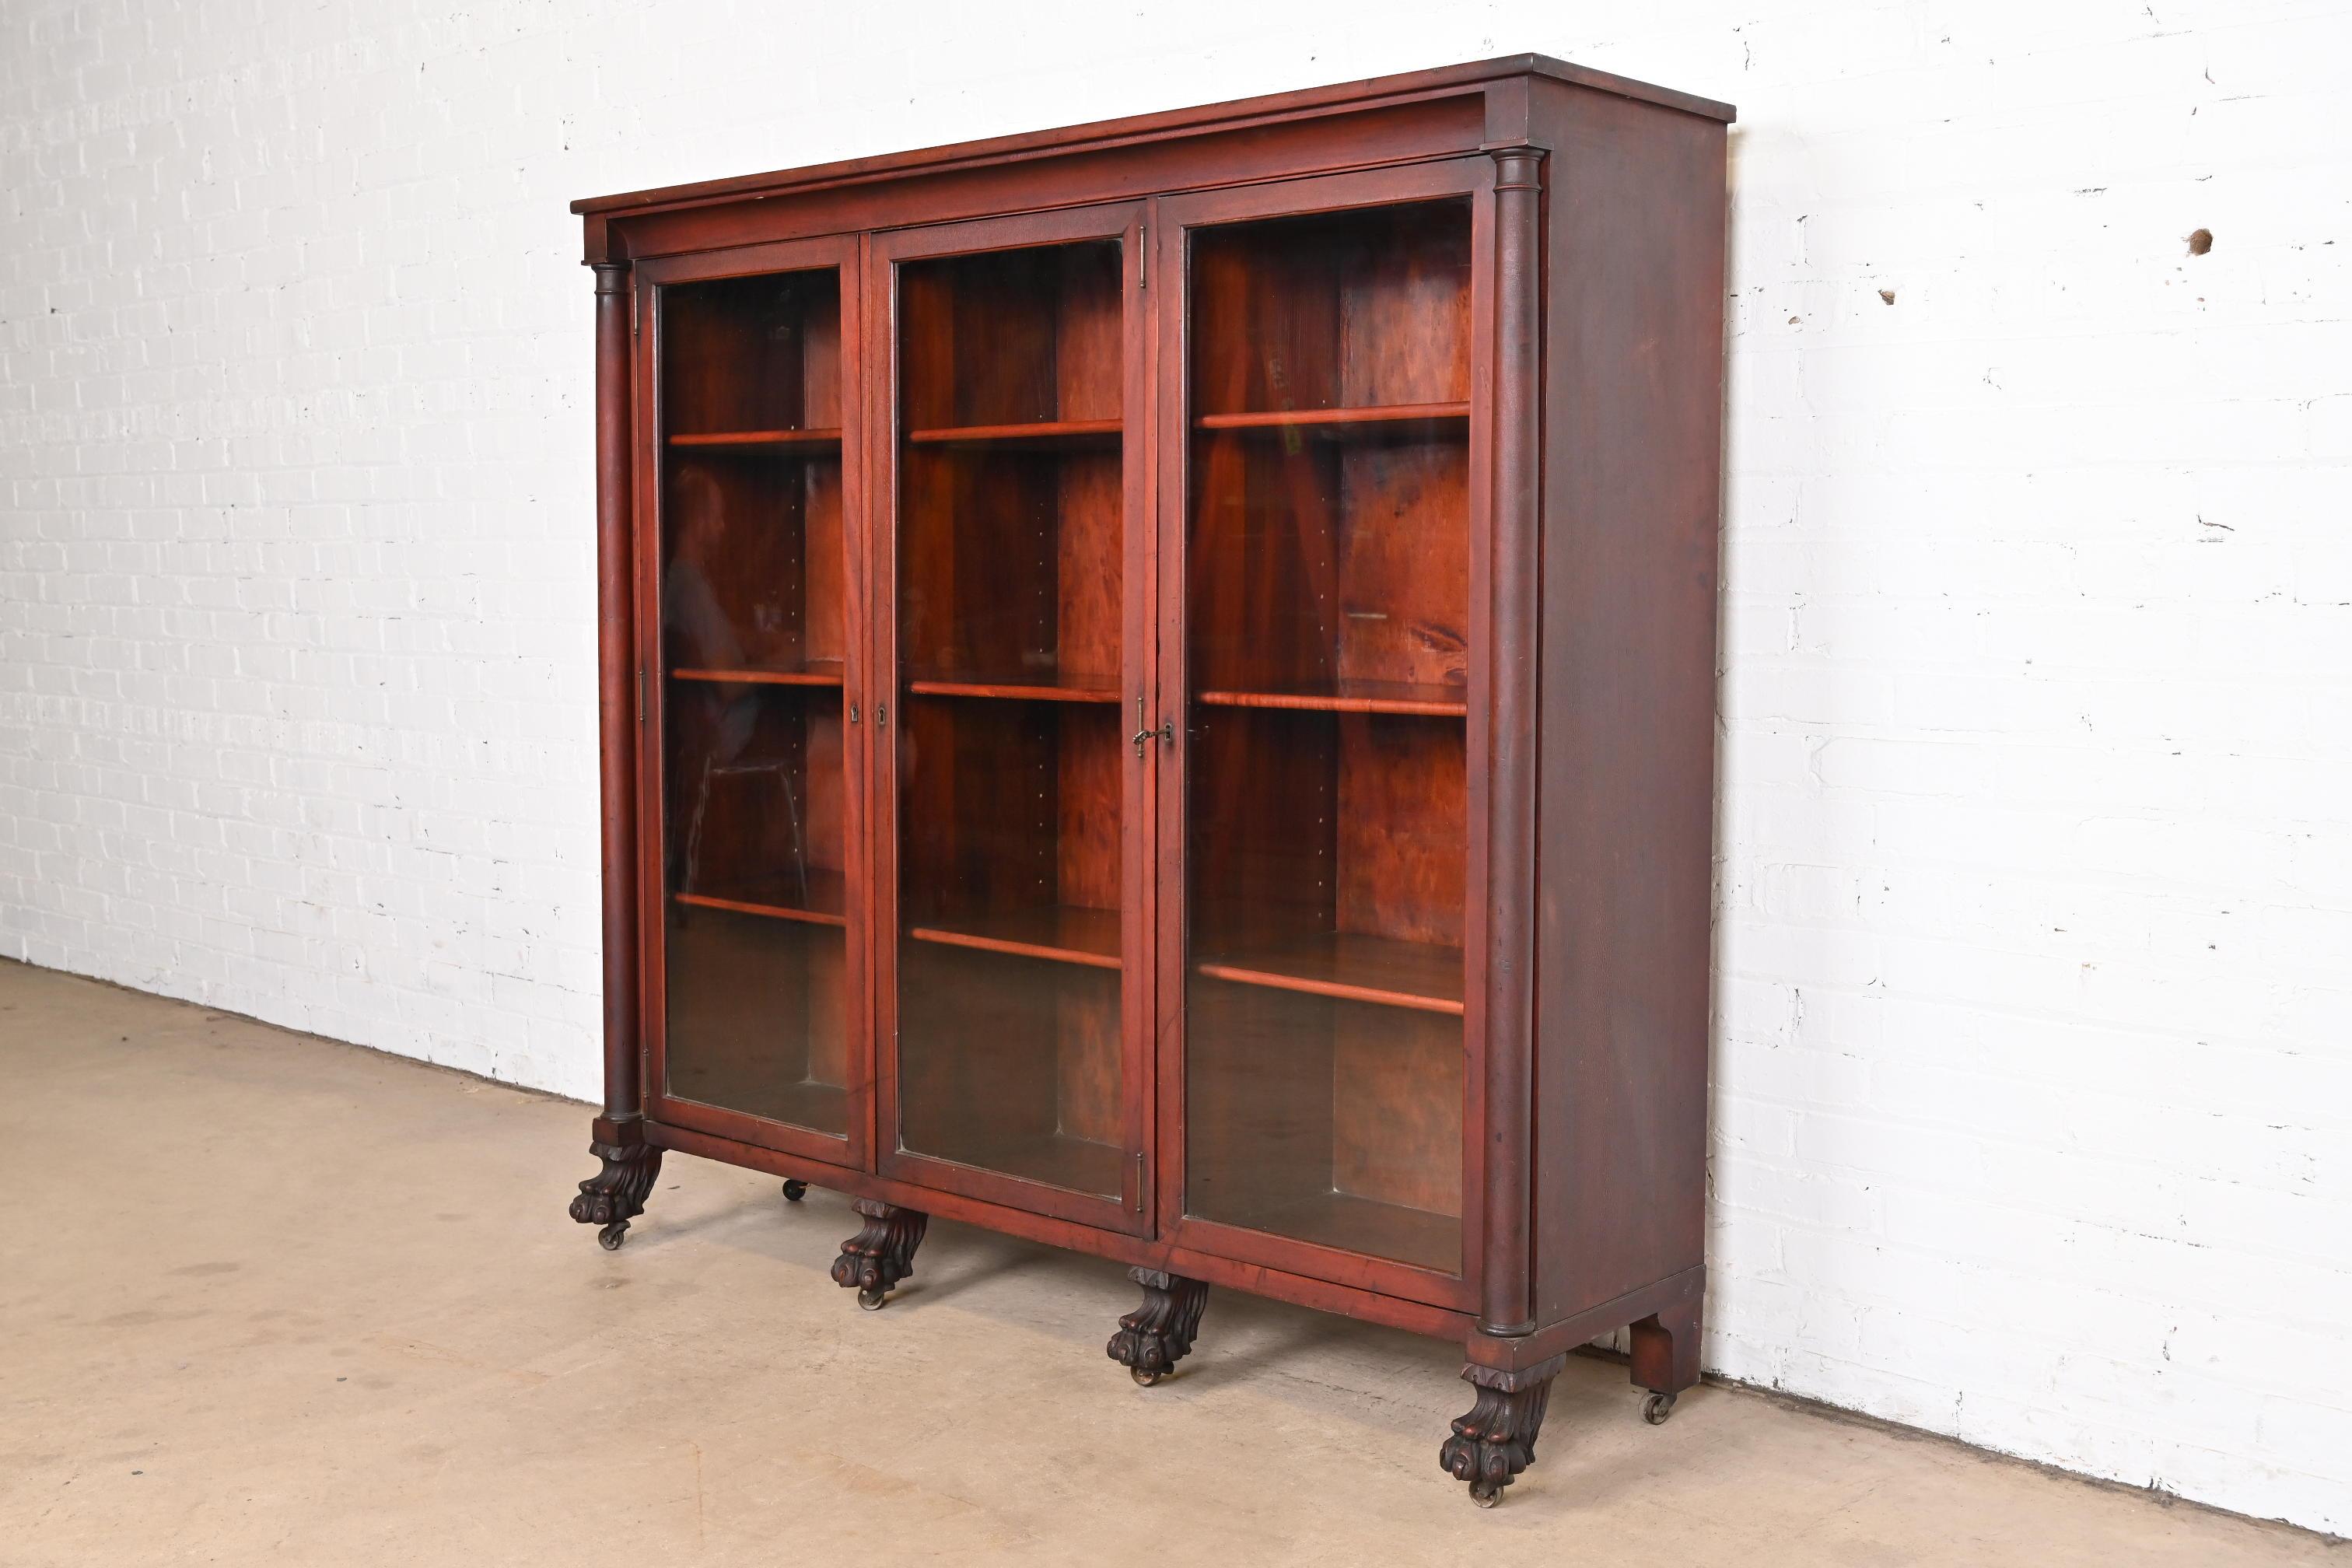 A beautiful antique American Empire or Victorian glass front triple bookcase with carved lion paw feet

In the manner of R.J. Horner

USA, circa 1890s

Carved mahogany, with glass front doors. Cabinets lock, and key is included.

Measures: